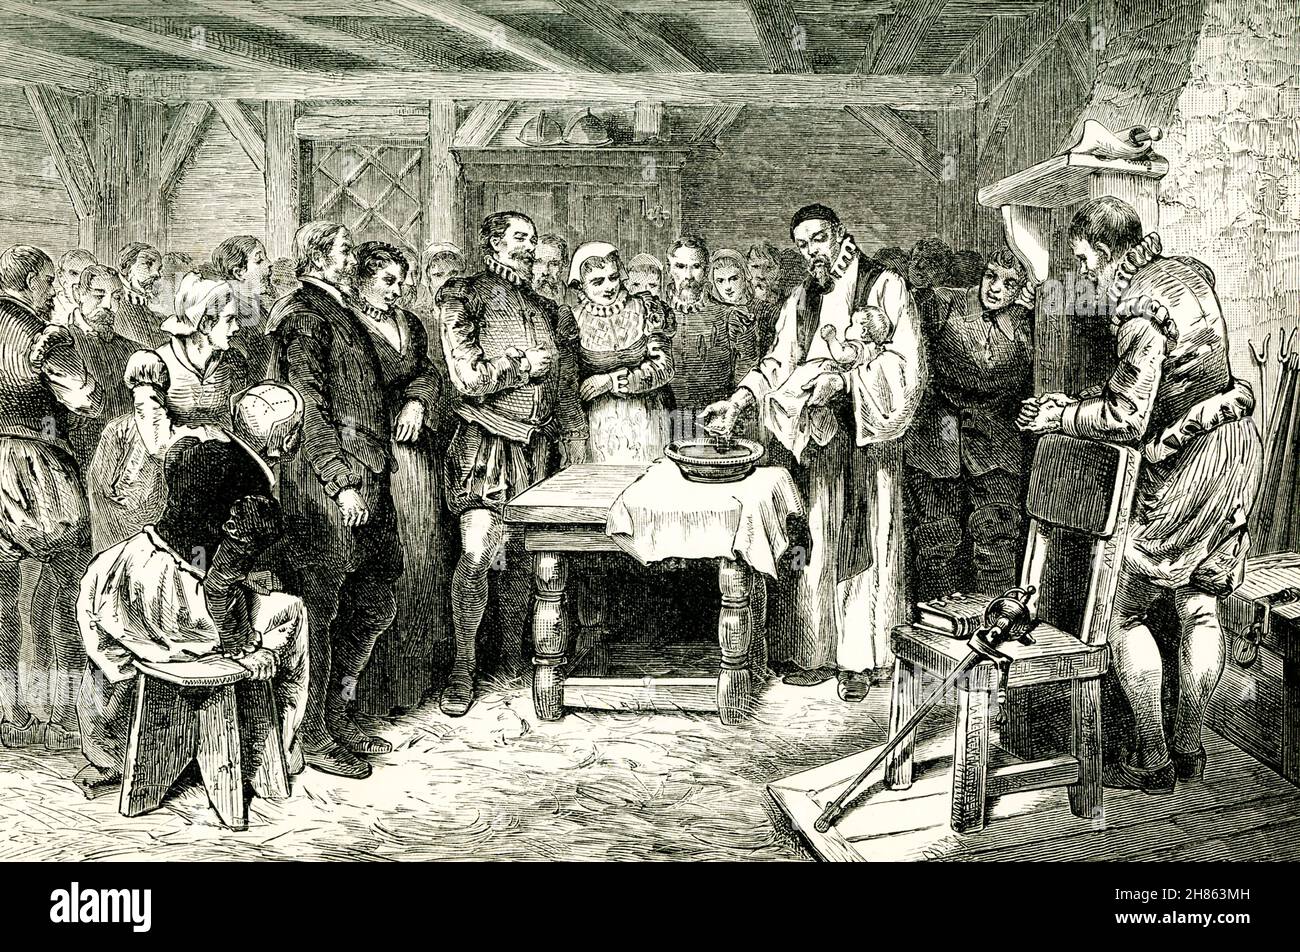 This 1890 illustration shows the baptism of Virginia Dare. Virginia Dare was the first English child born in August 1587 in a New World English colony - Roanoke. What became of Virginia and the other colonists remains a mystery. The fact of her birth is known because John White, Virginia's grandfather and the governor of the colony, returned to England in 1587 to seek fresh supplies. Stock Photo